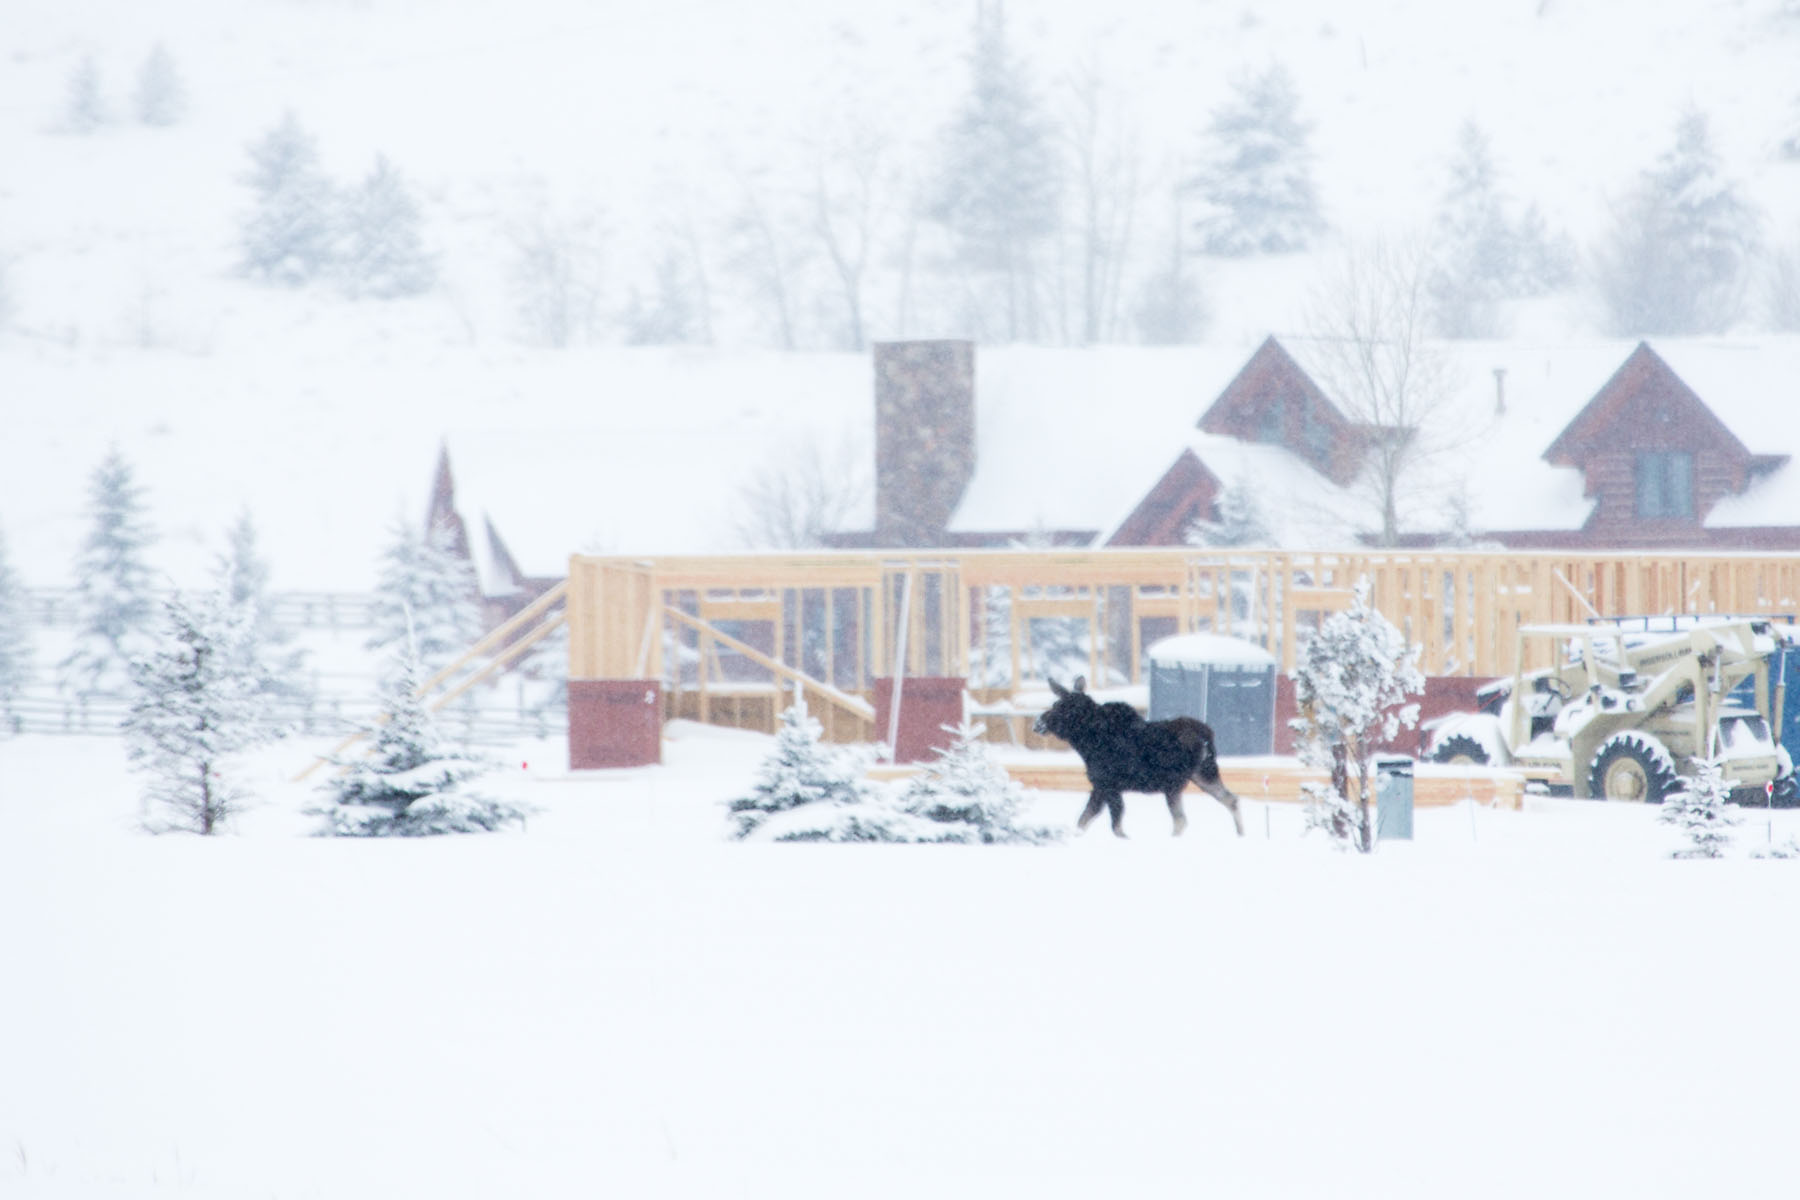 Moose running through neighborhood, Red Lodge, MT, February 2021.  Click for next photo.